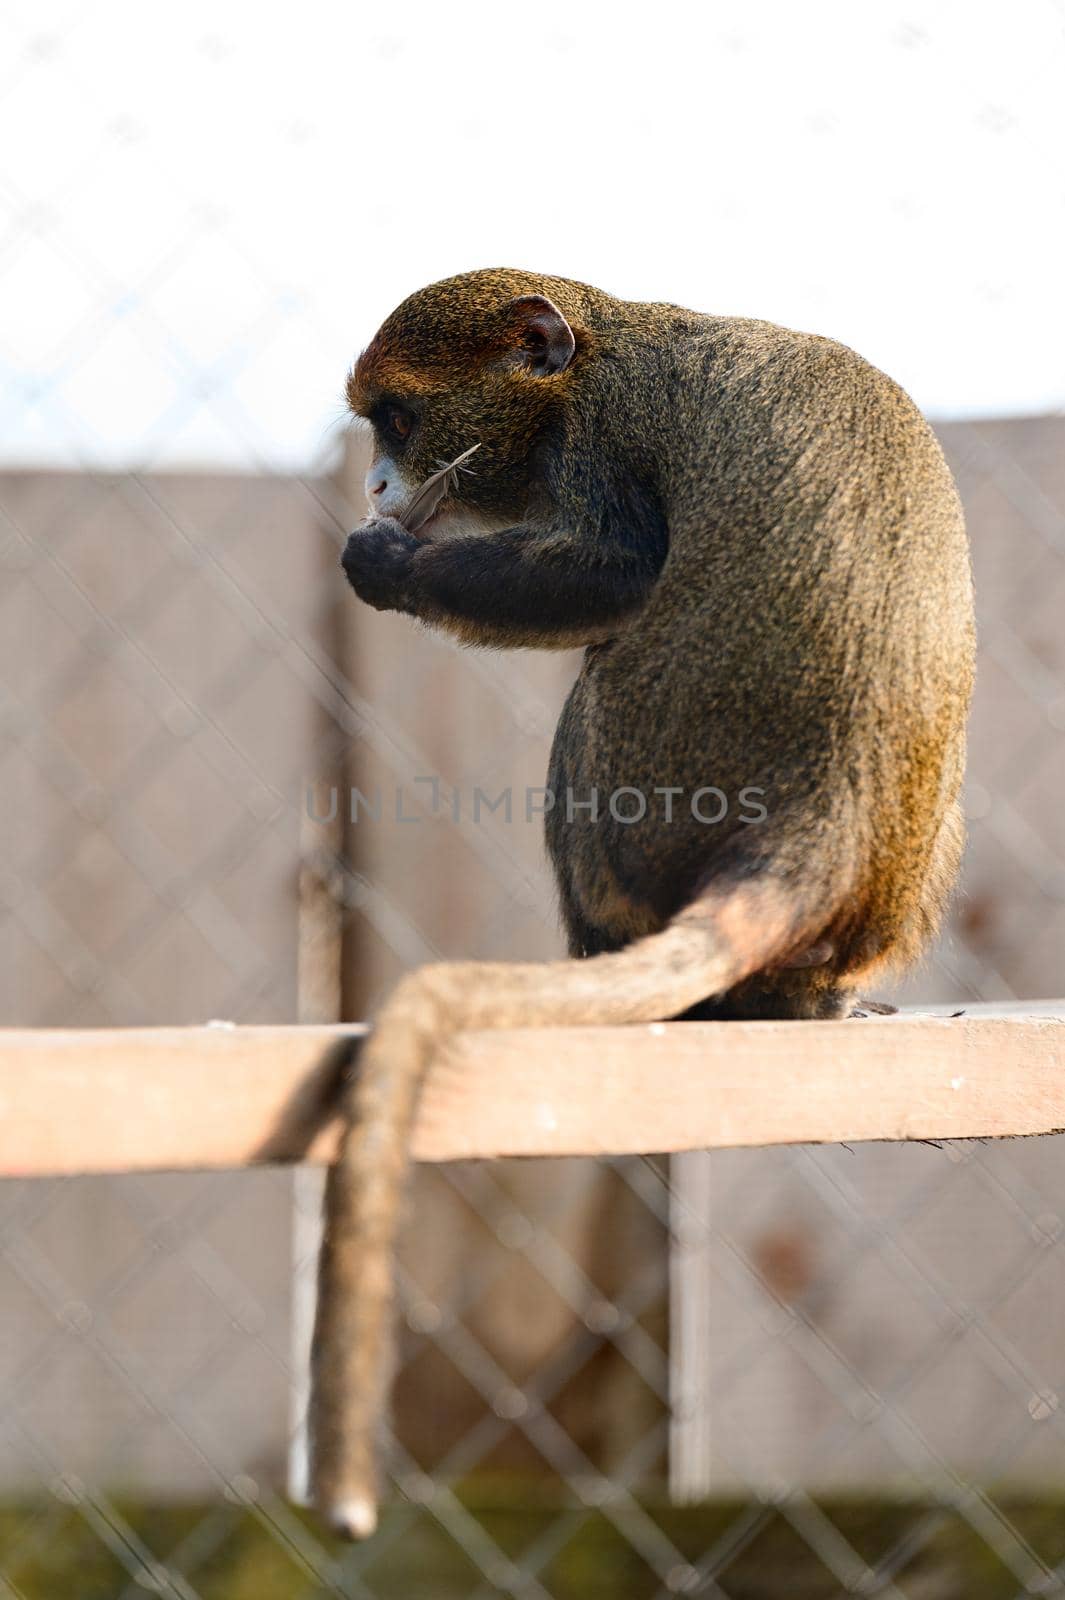 De Brazza monkey Cercopithecus zanectus from Africa in captivity, isolated moth in a zoo, a zoo in Ukraine.